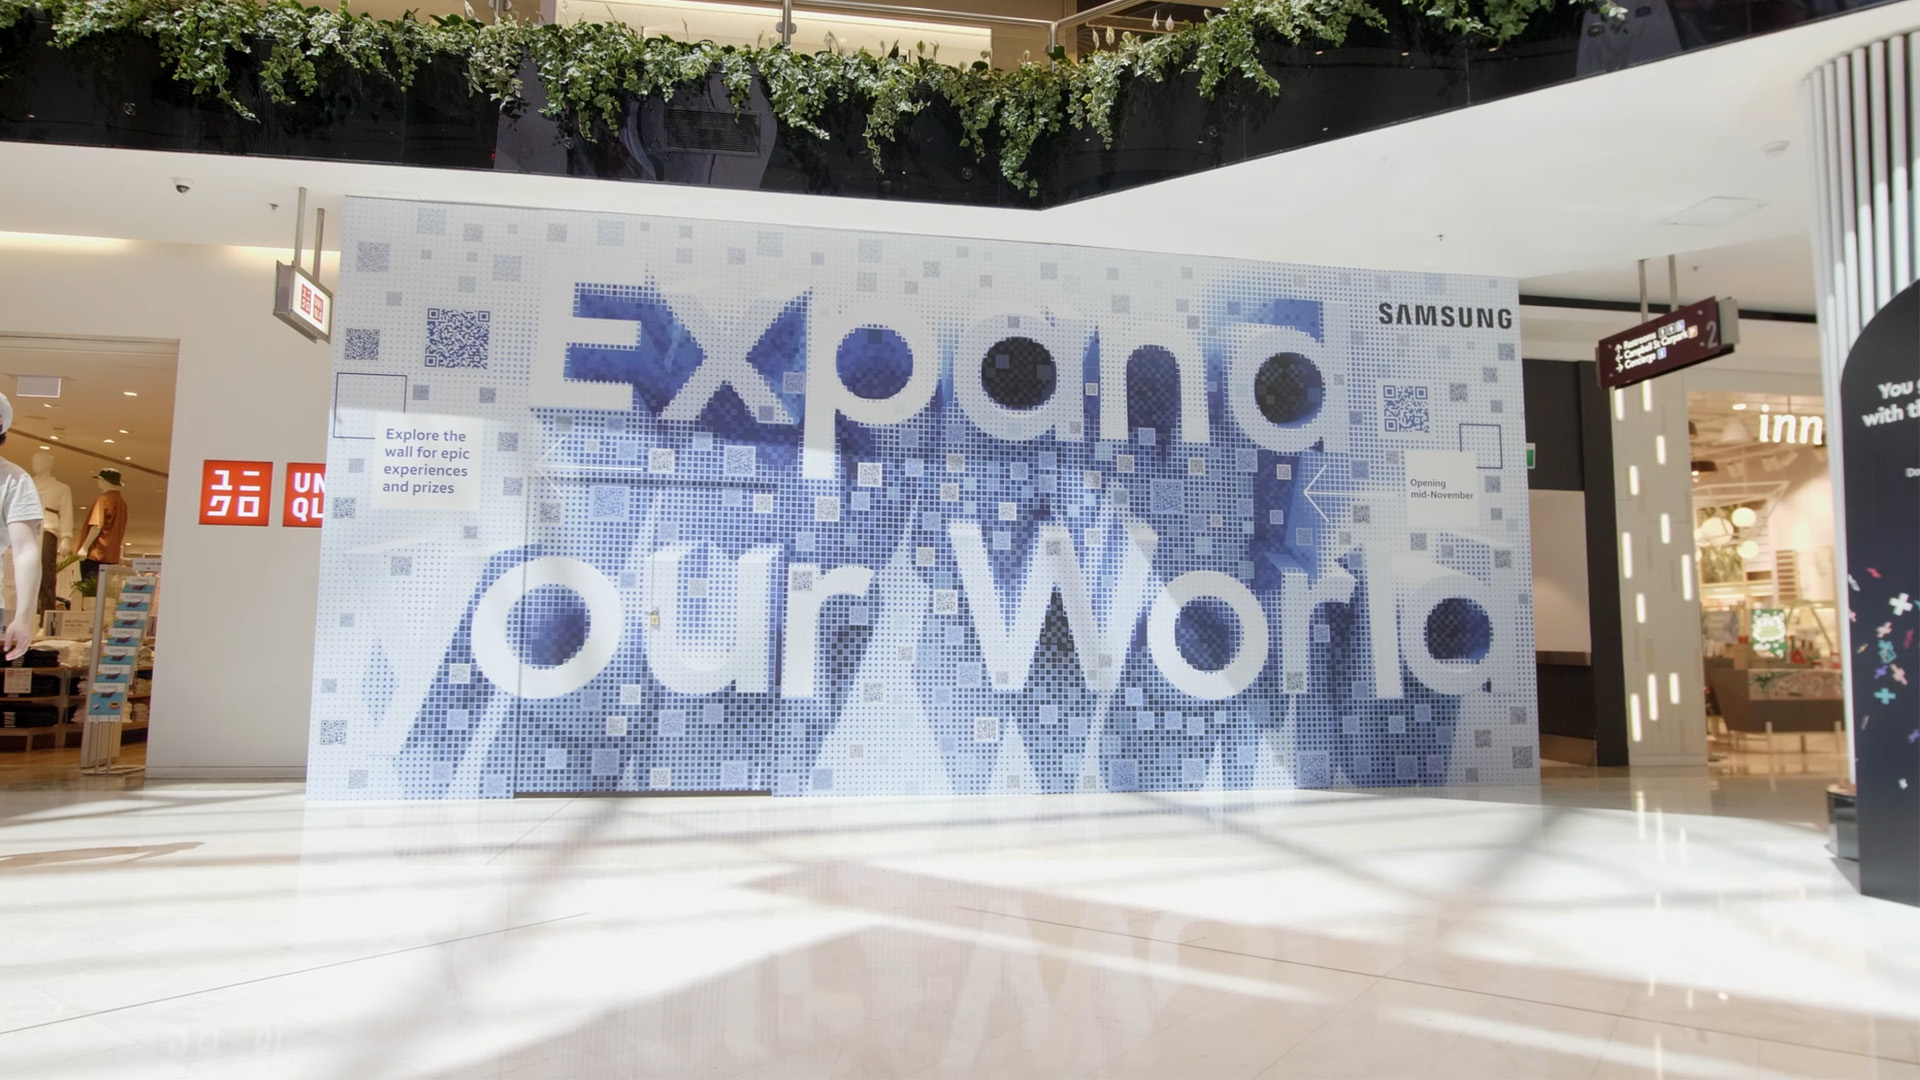 Sydney Experiential piece for Samsung featuring a mosaic of scannable QR codes that come together to say 'Expand our World'